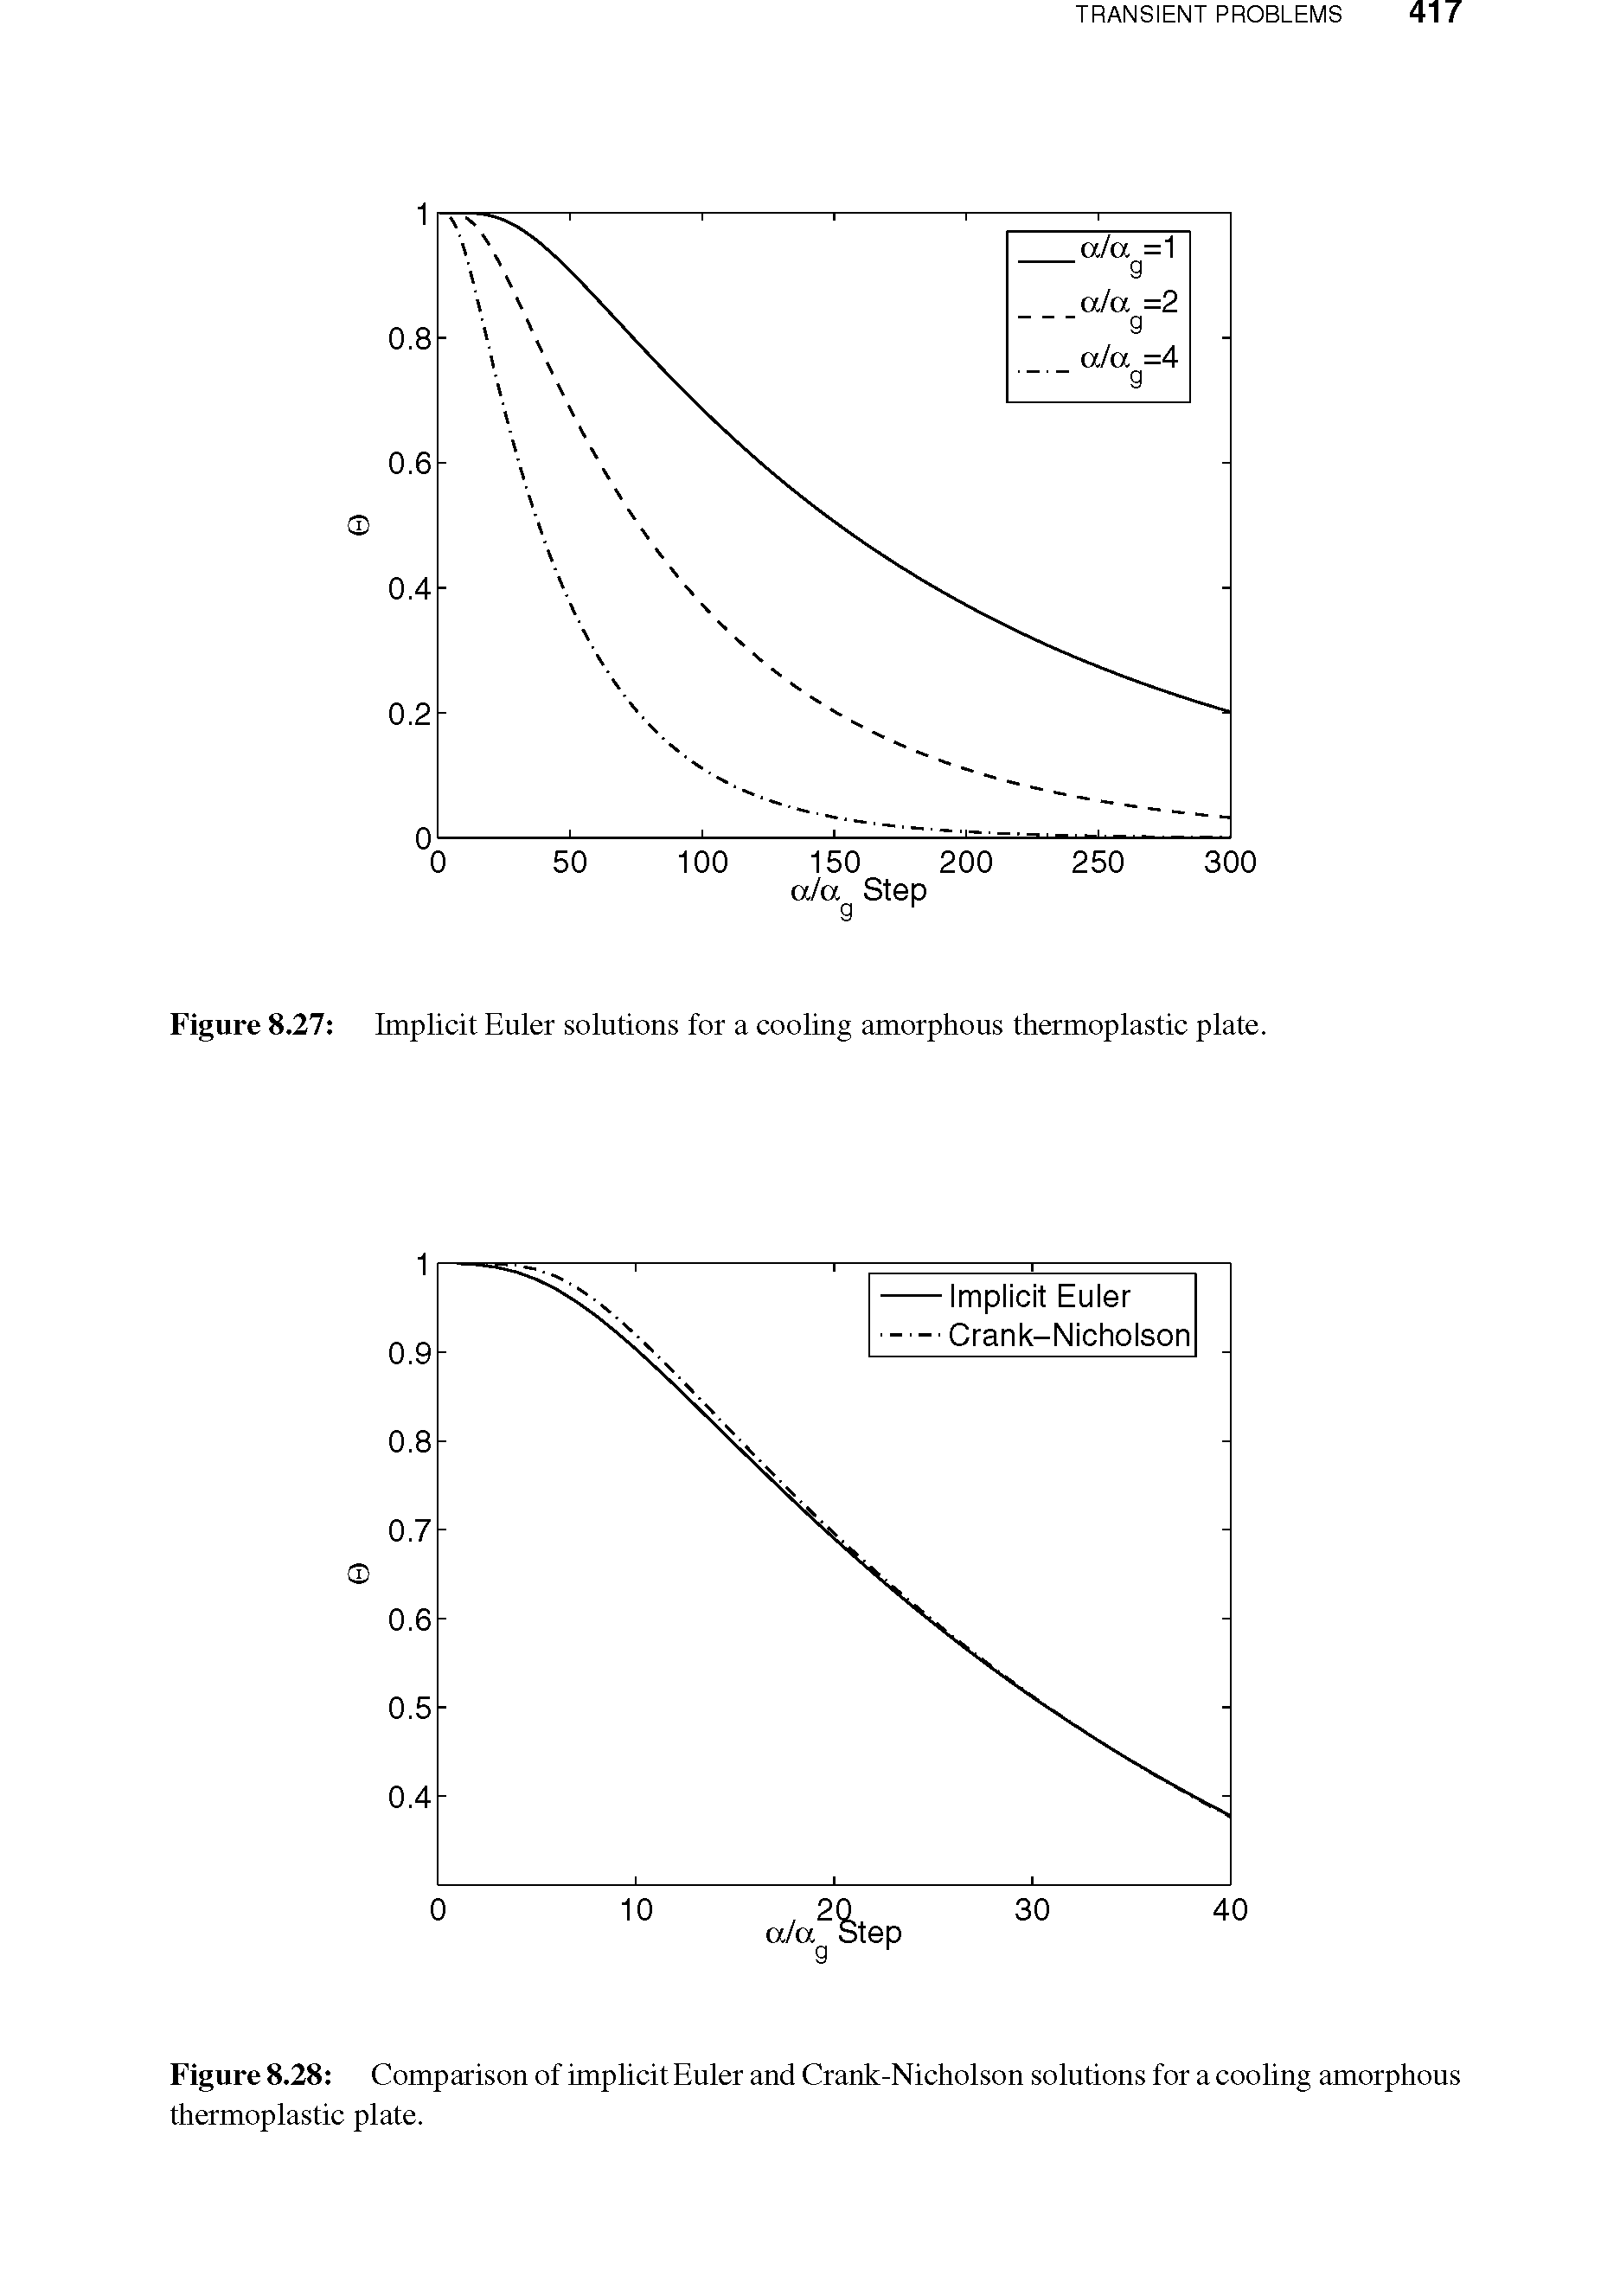 Figure 8.28 Comparison of implicit Euler and Crank-Nicholson solutions for a cooling amorphous thermoplastic plate.